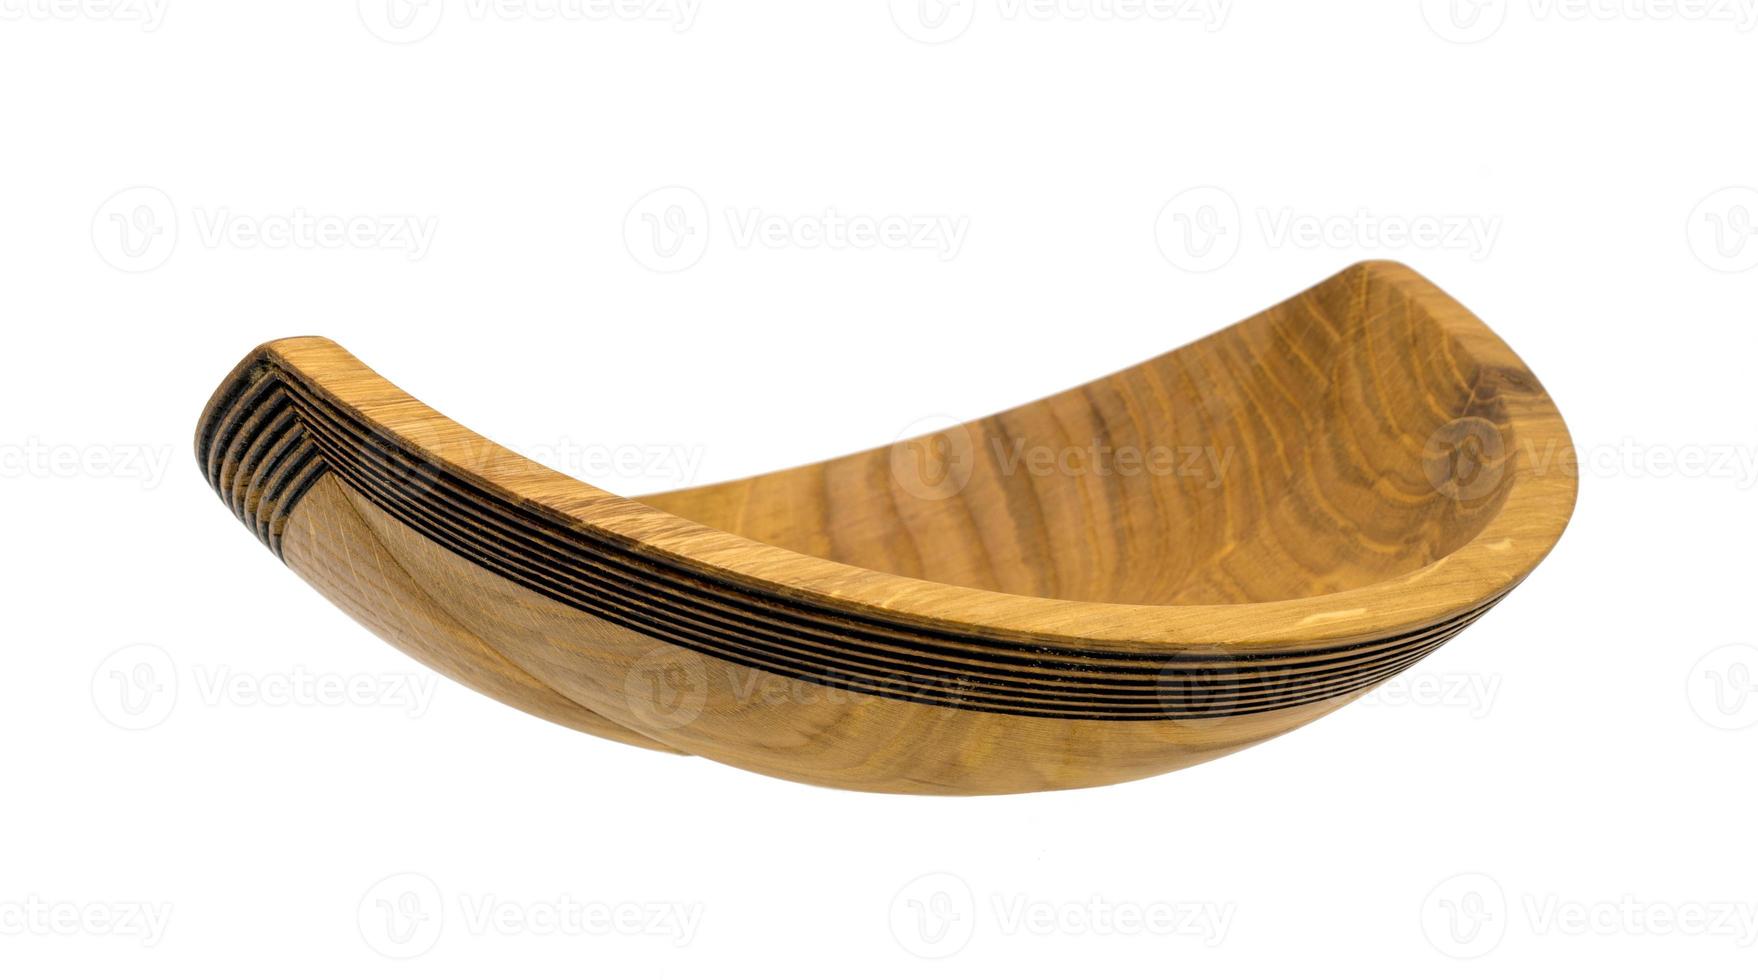 Hand turned wooden bowl made of oak in the form of a ship photo